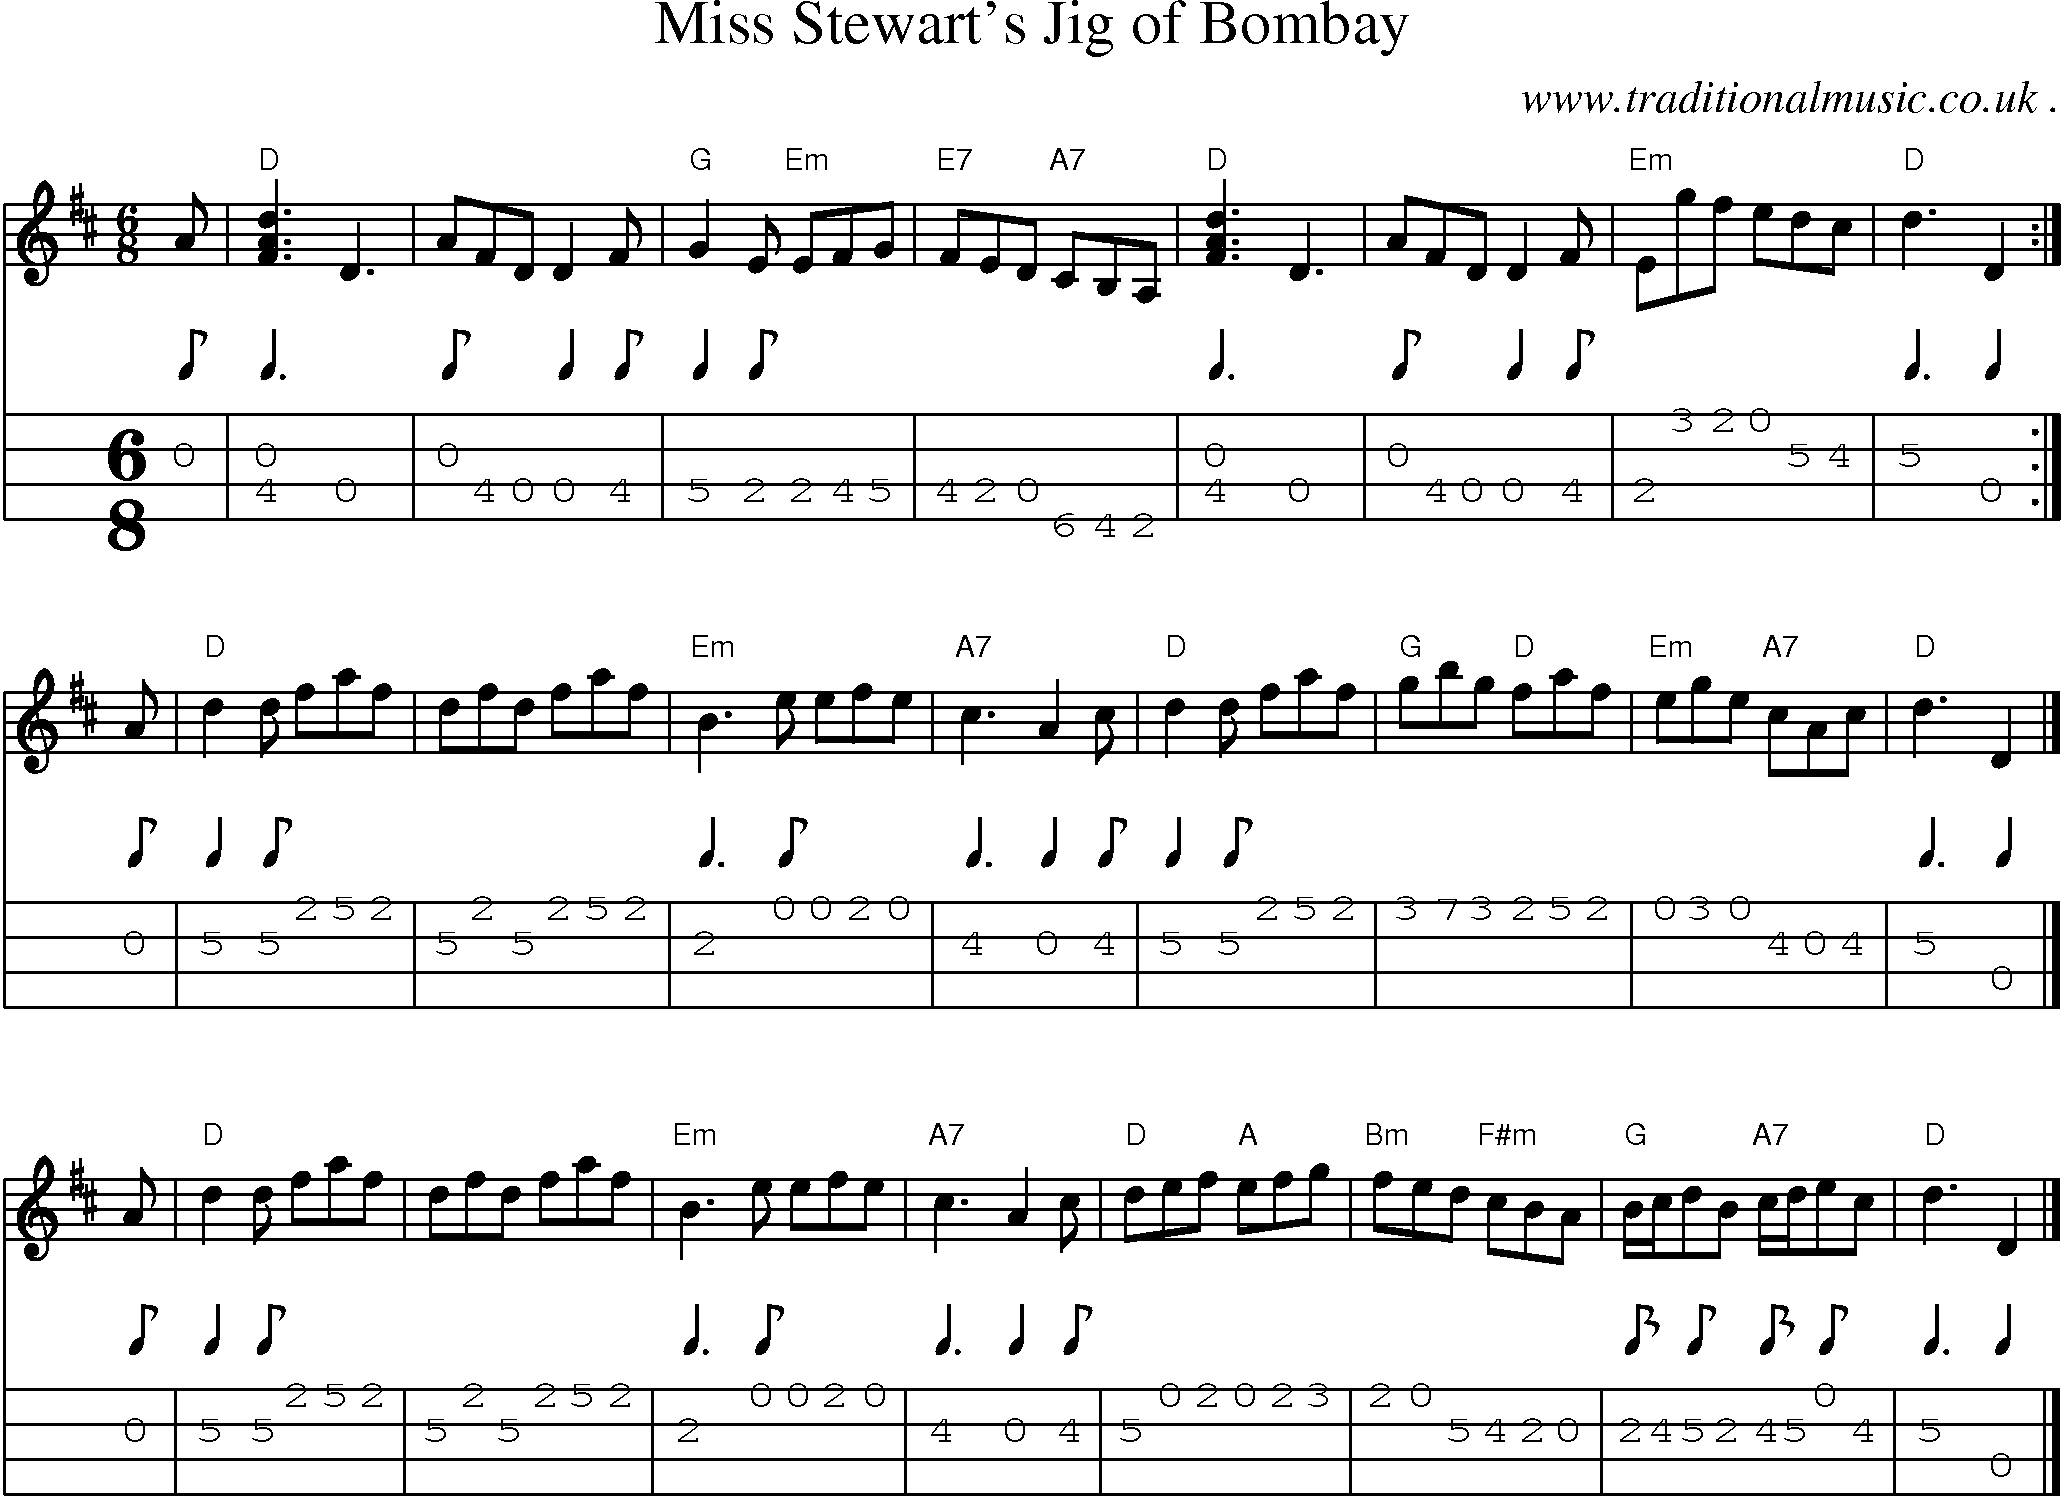 Sheet-music  score, Chords and Mandolin Tabs for Miss Stewarts Jig Of Bombay